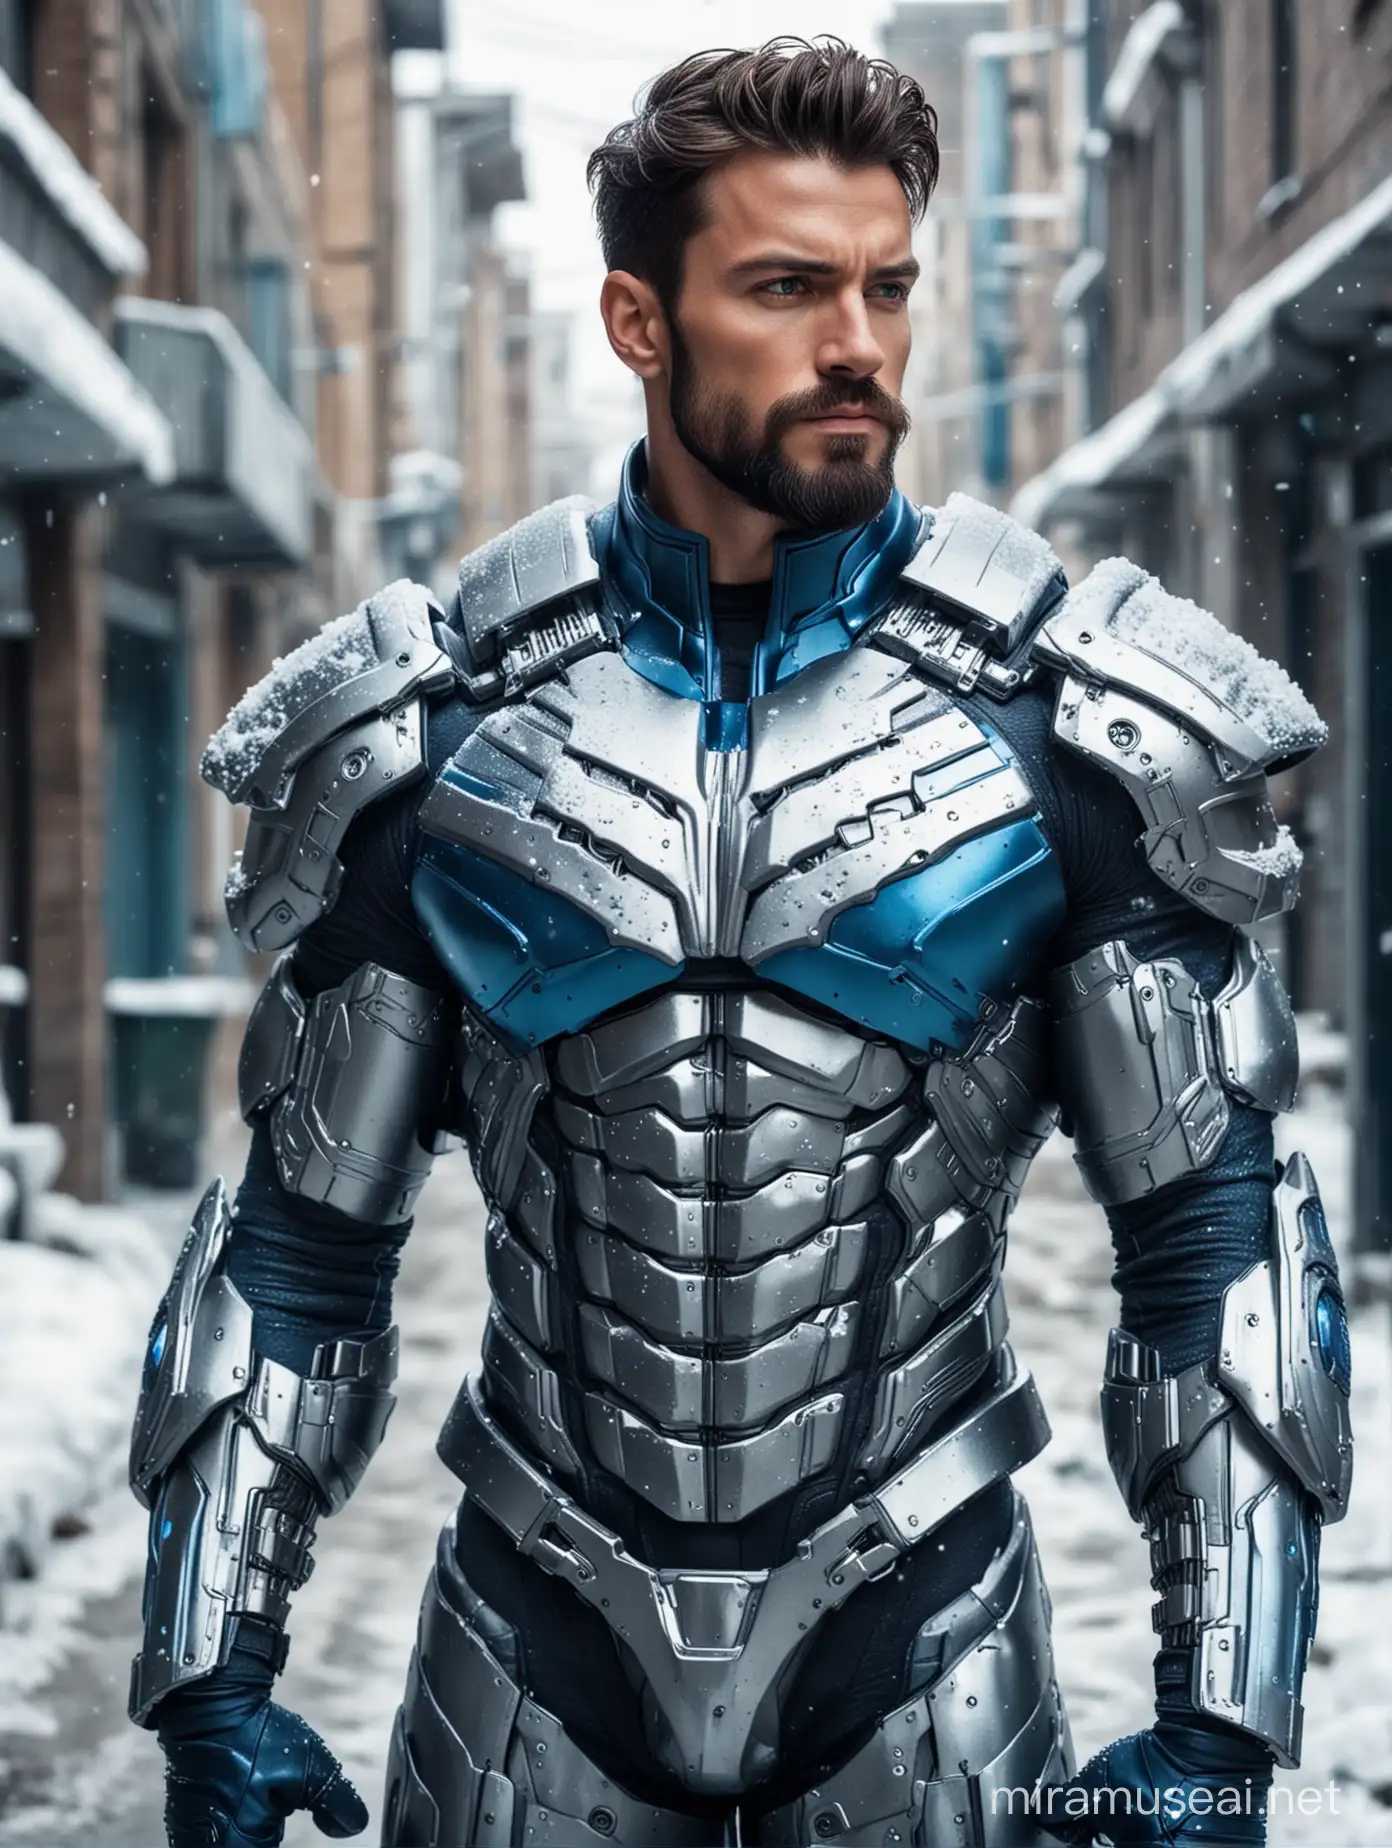 Tall and handsome bodybuilder men with beautiful hairstyle and beard with attractive eyes and Big wide shoulder and chest in sci-fi High Tech blue and sliver armour suit with firearms standing on snowy street 